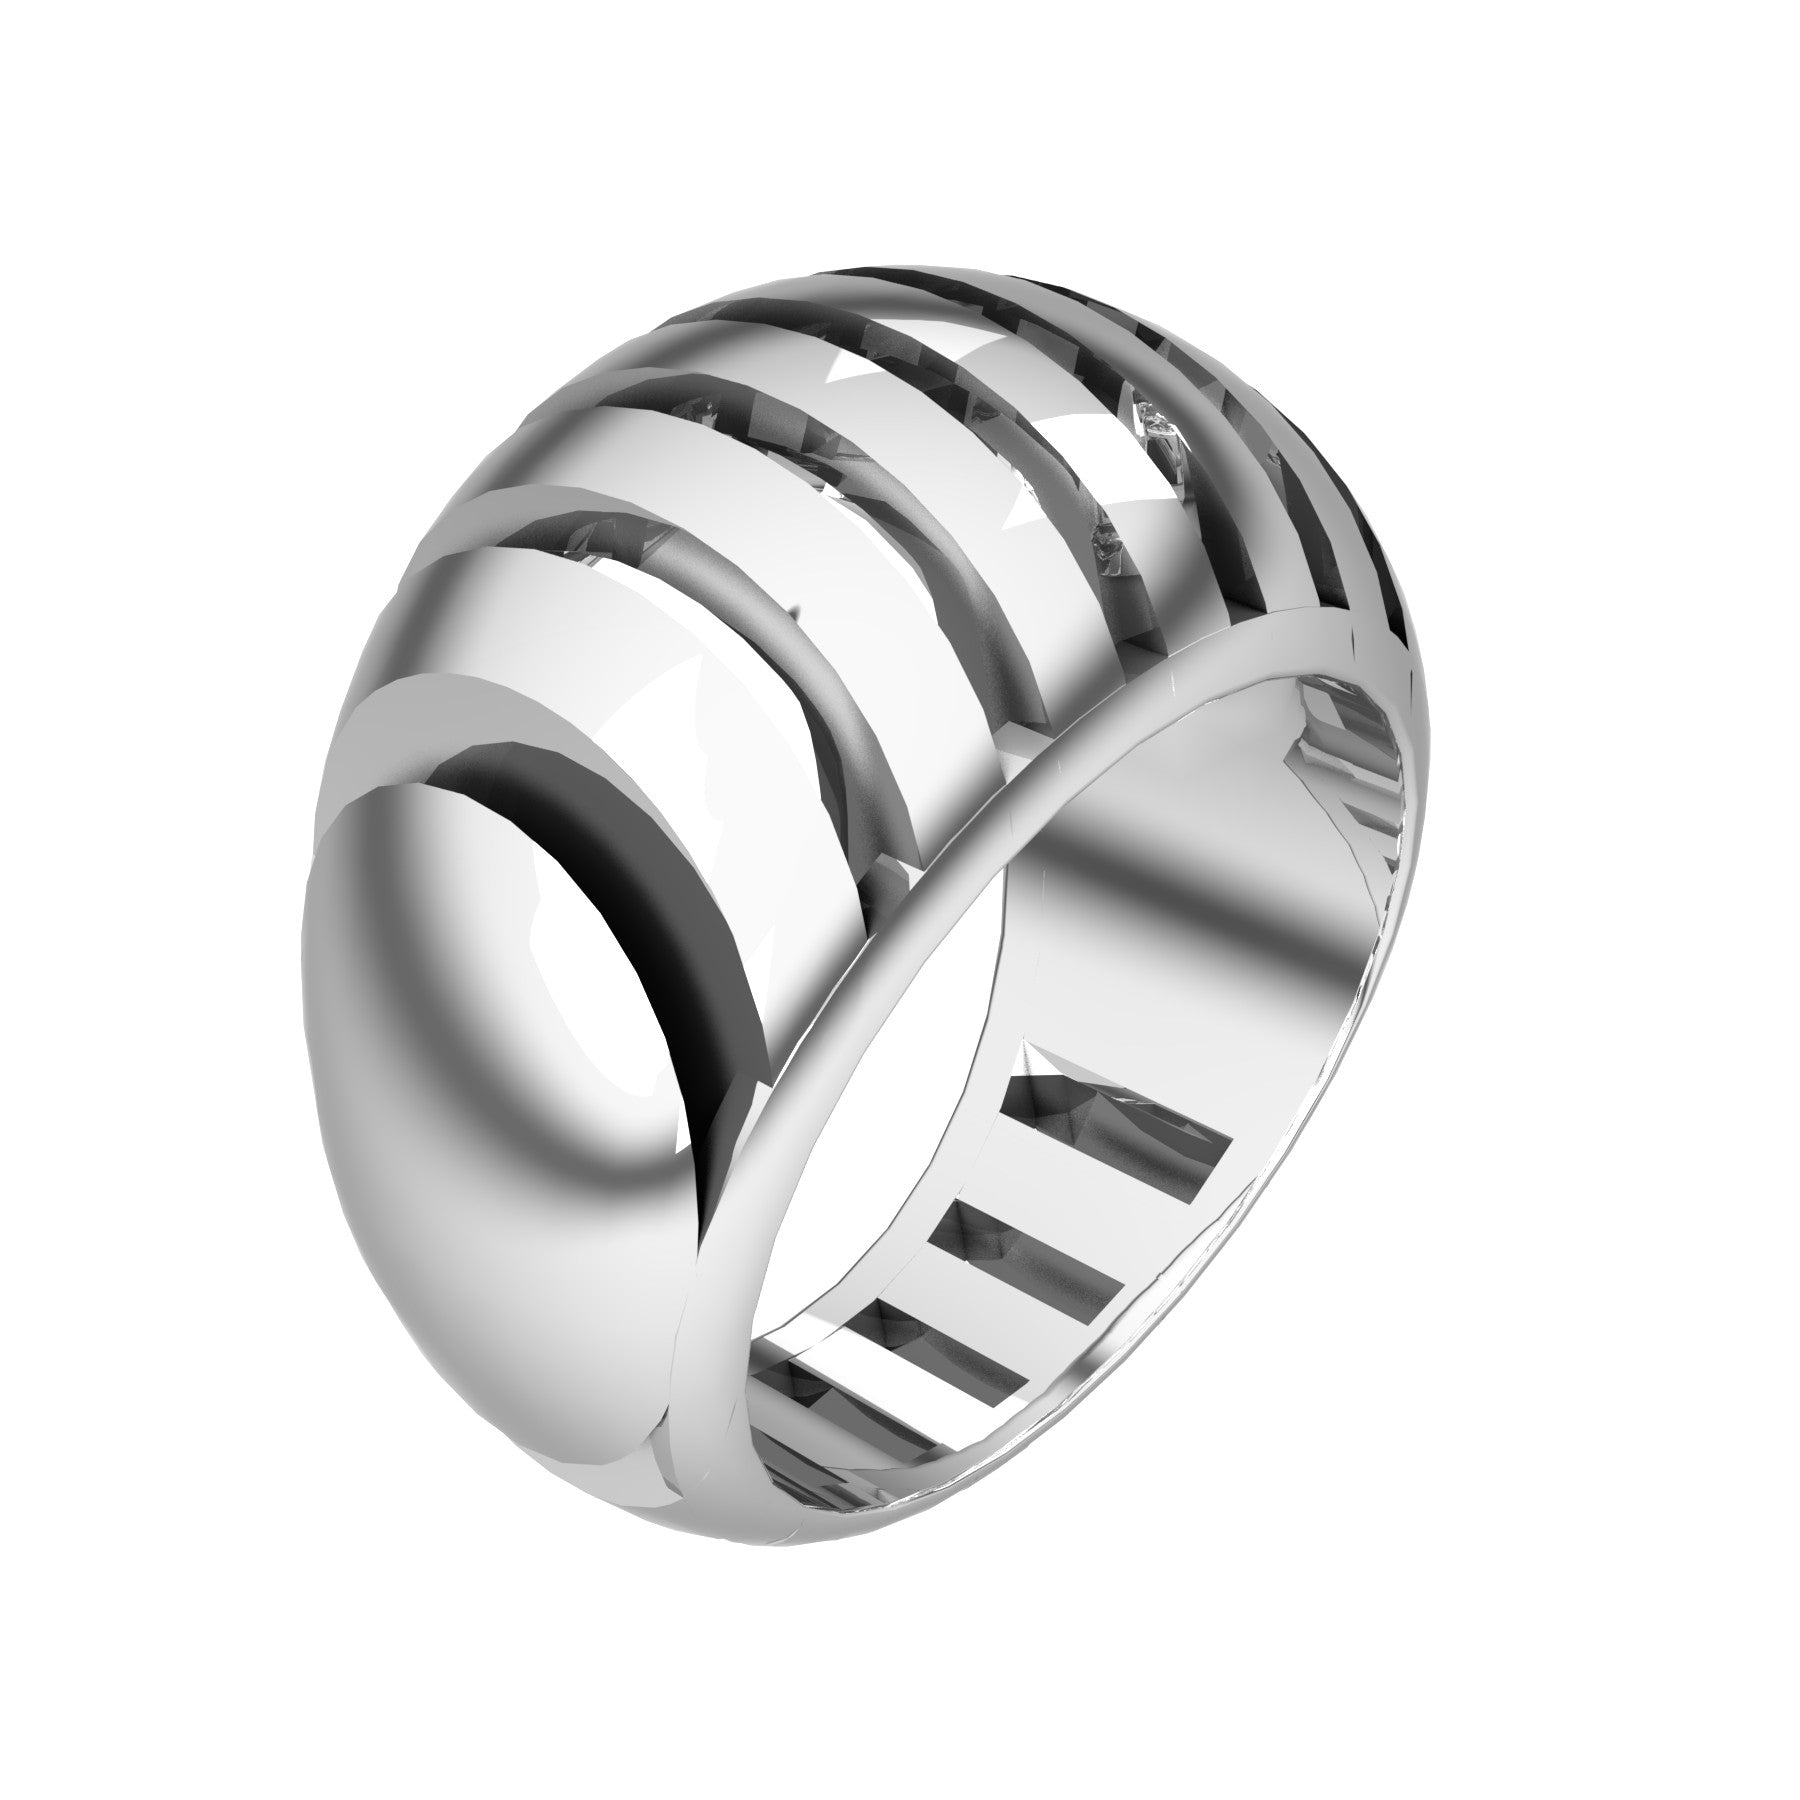 split 4 ring, 18 K white gold, weight about 11,5 g. (0,40 oz), width 14,0 mm max